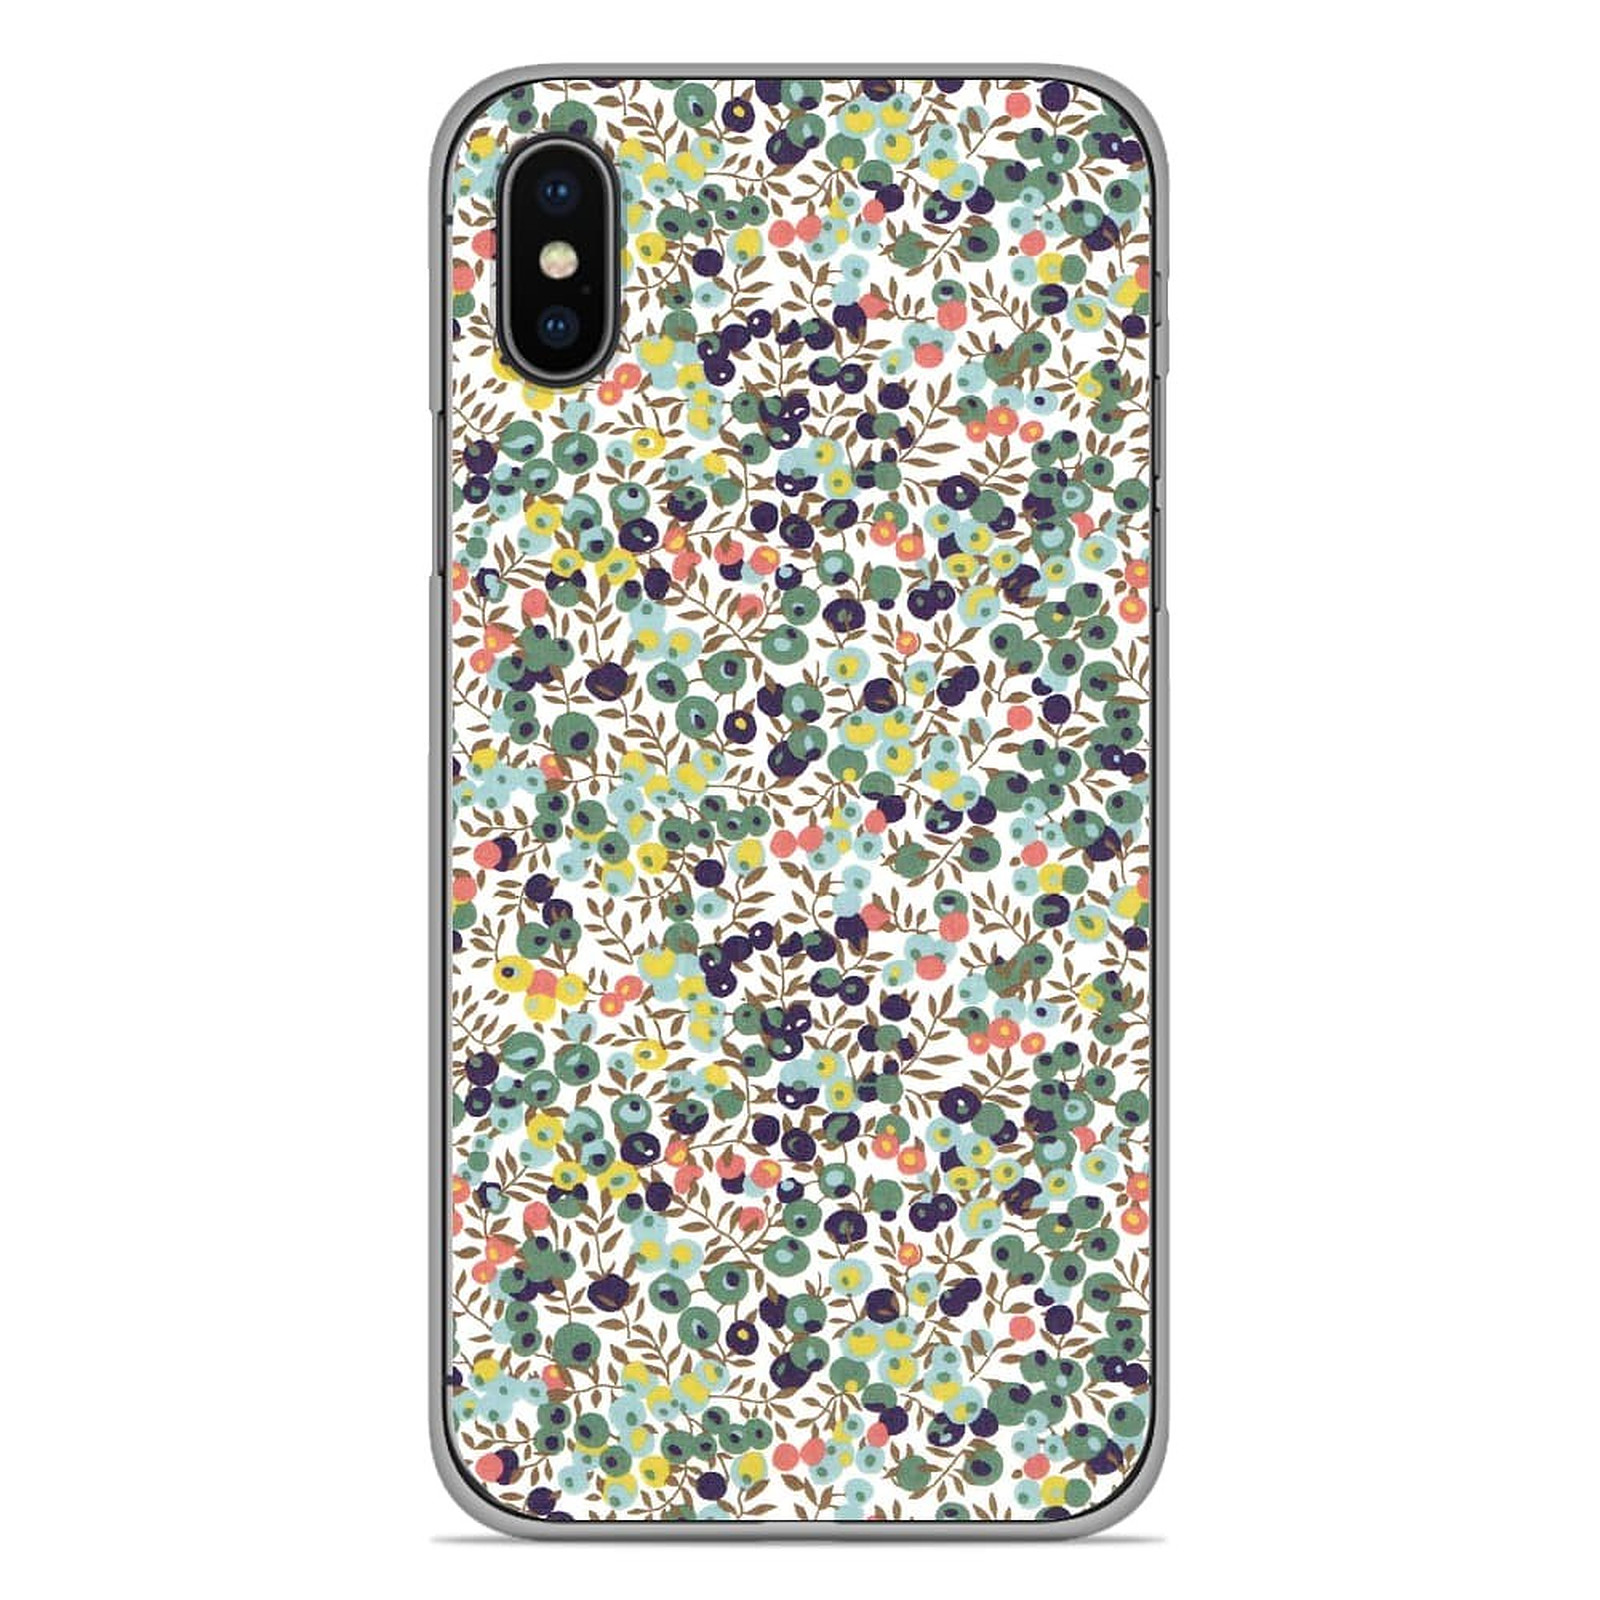 1001 Coques Coque silicone gel Apple iPhone XS Max motif Liberty Wiltshire Vert - Coque telephone 1001Coques